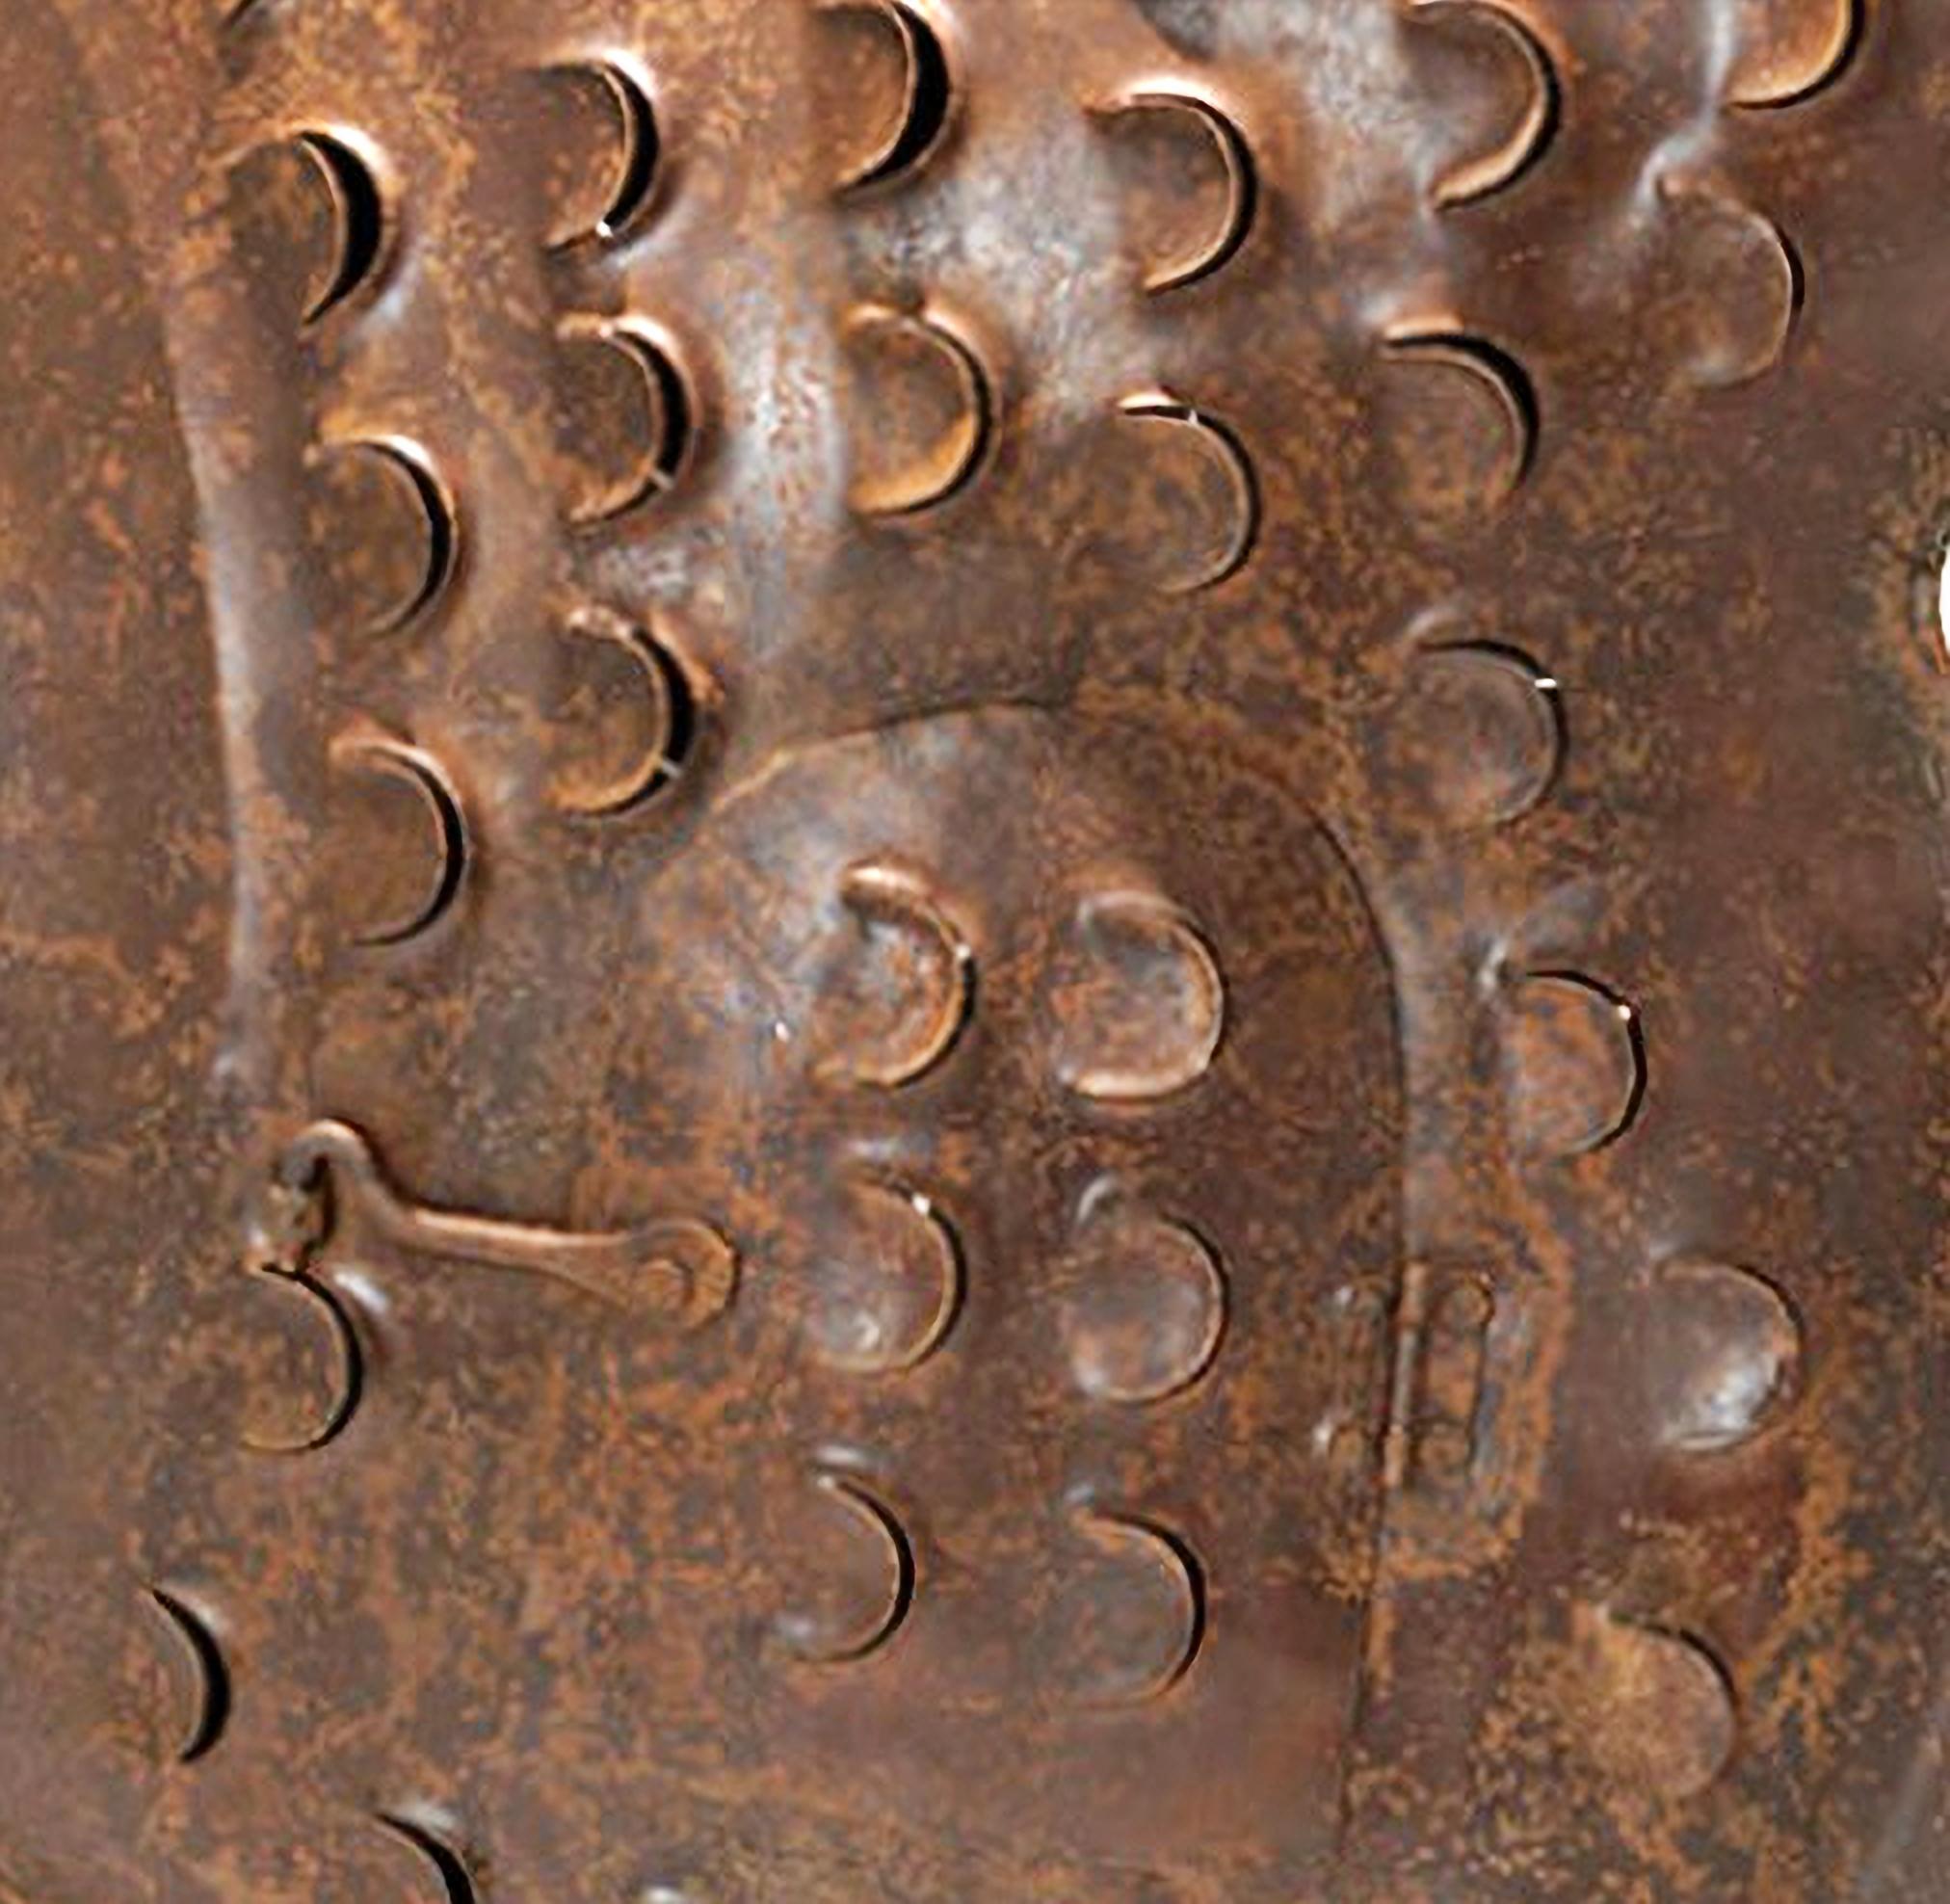 Brown decorative metal fish
Metals : Iron
Sculpture
Size: 63 x 47 cm
Weight: 2 kg
Every single piece is handmade and unique
Availability: Available.